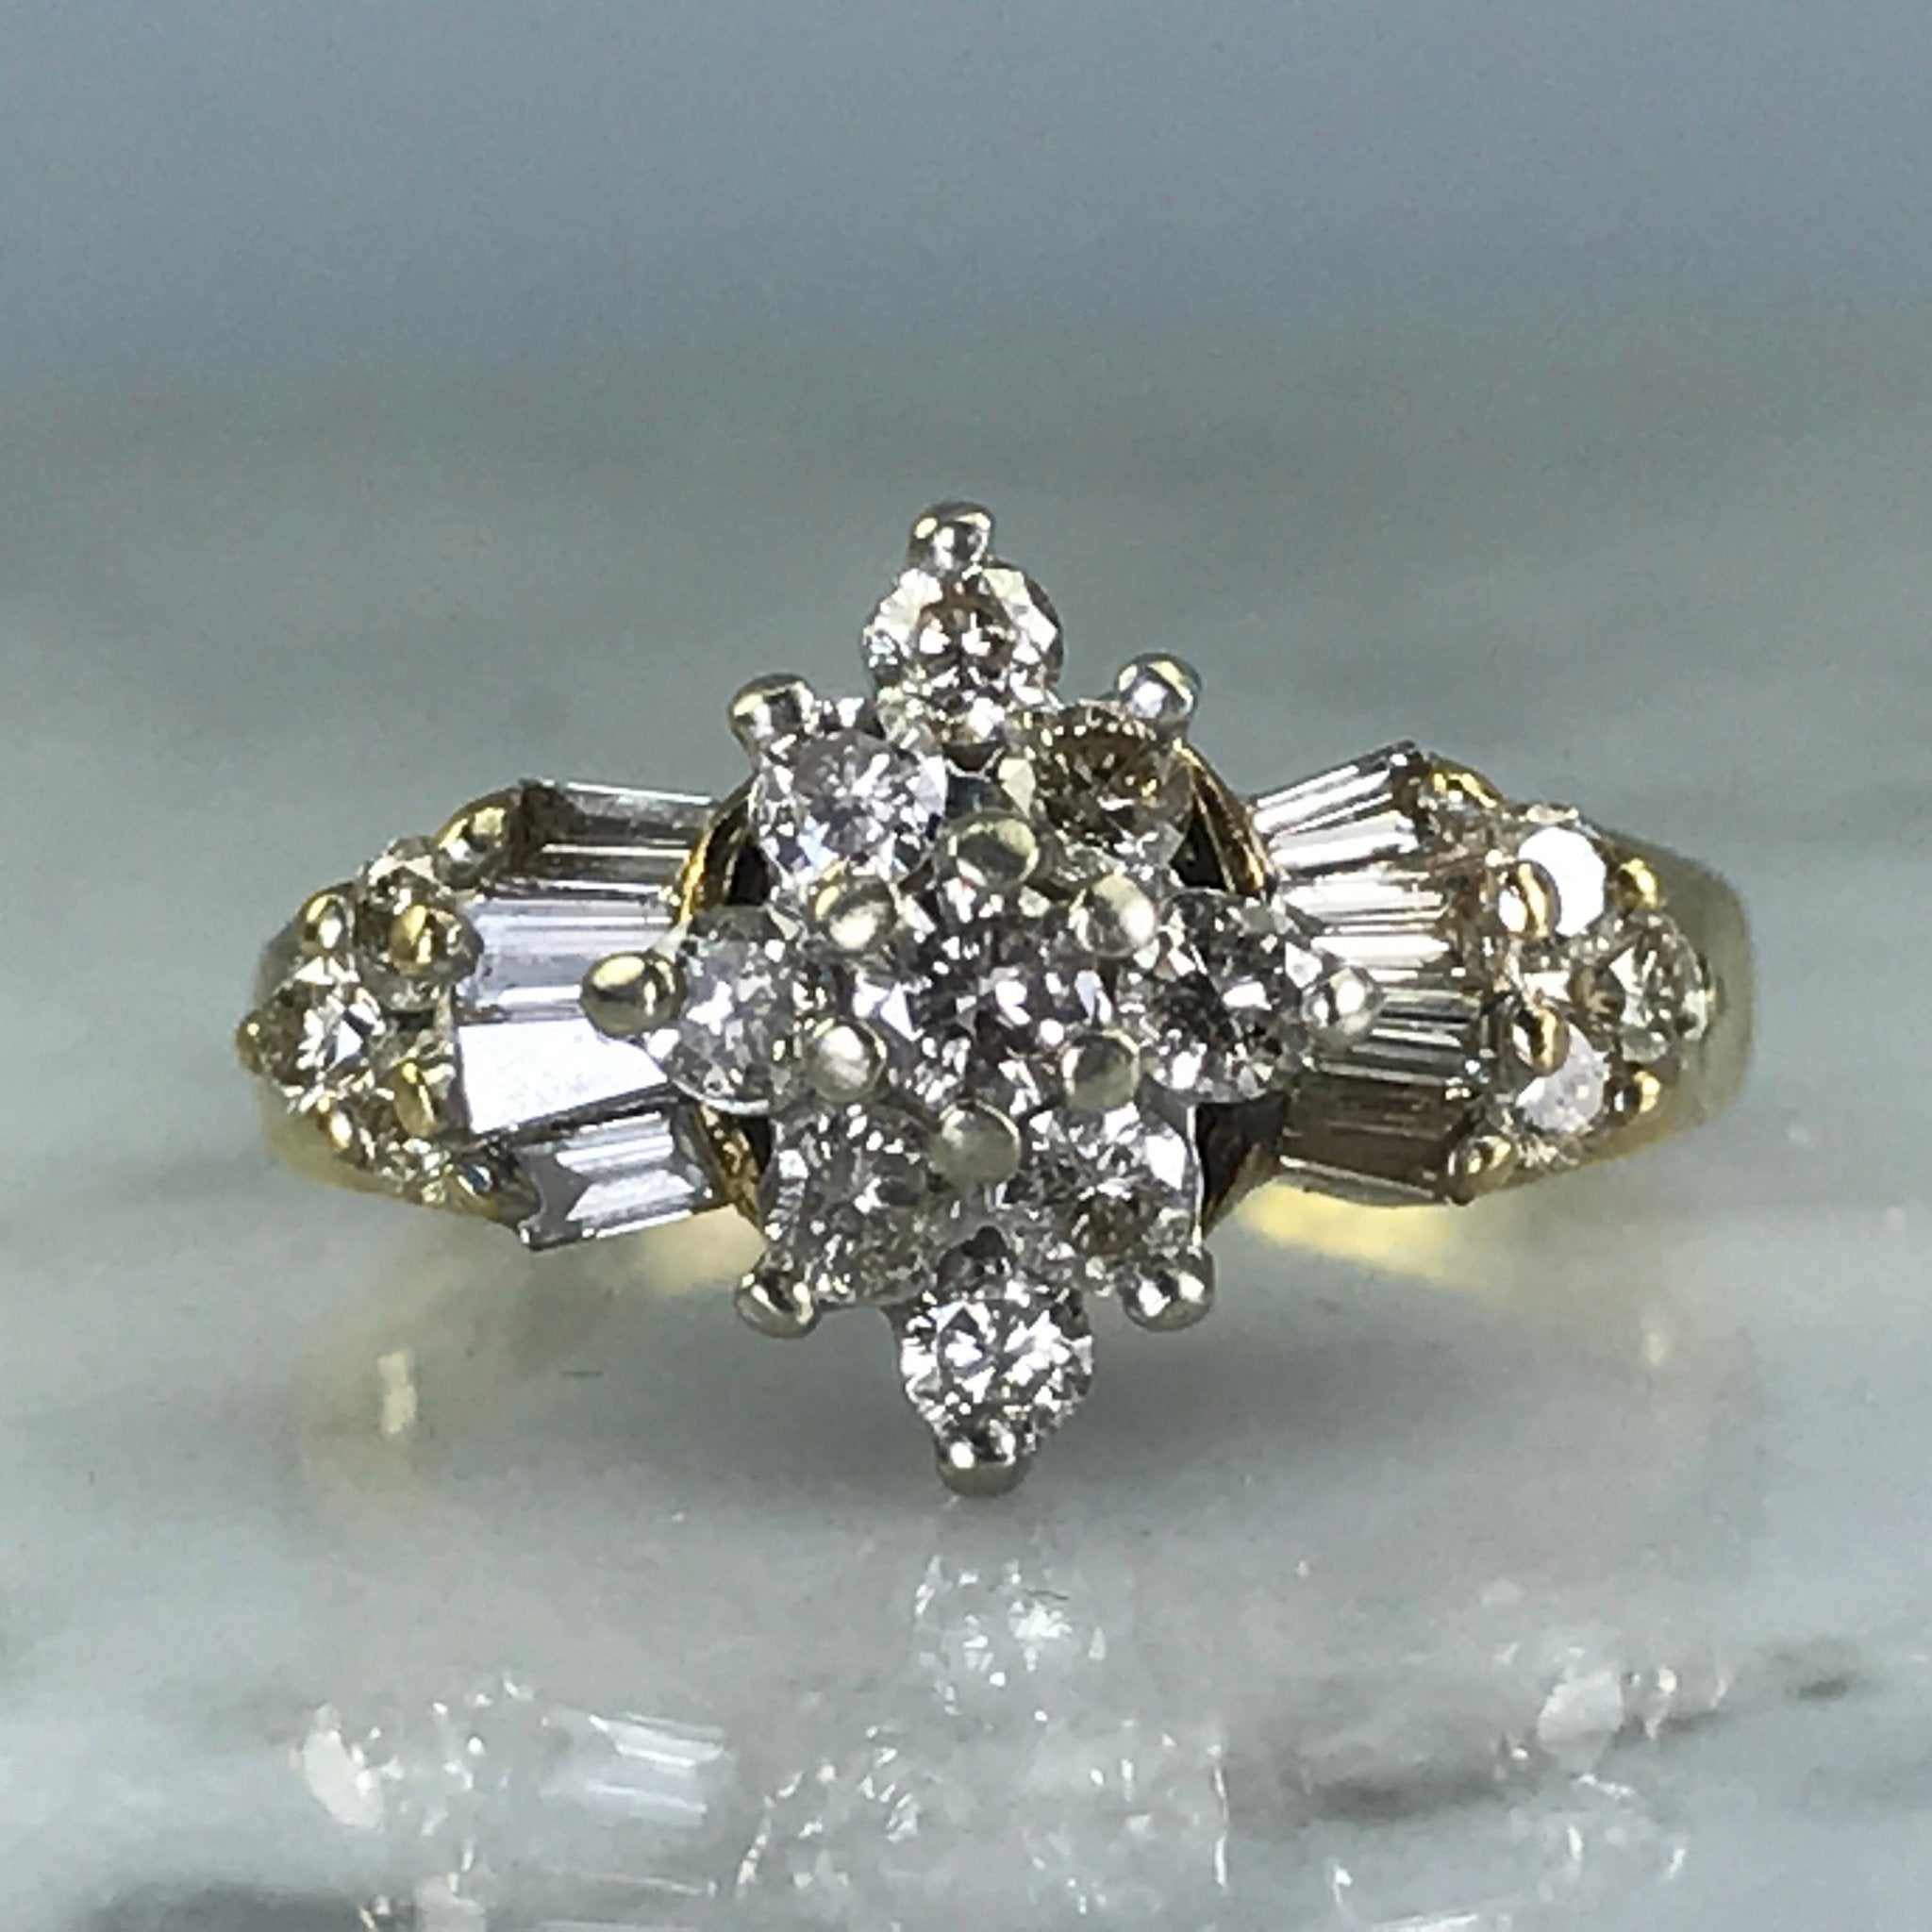 Erickson Jewelers - 25 year anniversary ring. A diamond for each year!  💎🥂💎🥂💎🥂💎 (Available in all white gold) . 1.00cttw $2995 2.00cttw  $5450 . . #ericksonjewelers #l2lfirst #imdowntown #25years #diamonds  #DiamondAnniversaryRing #ijomasterjeweler ...